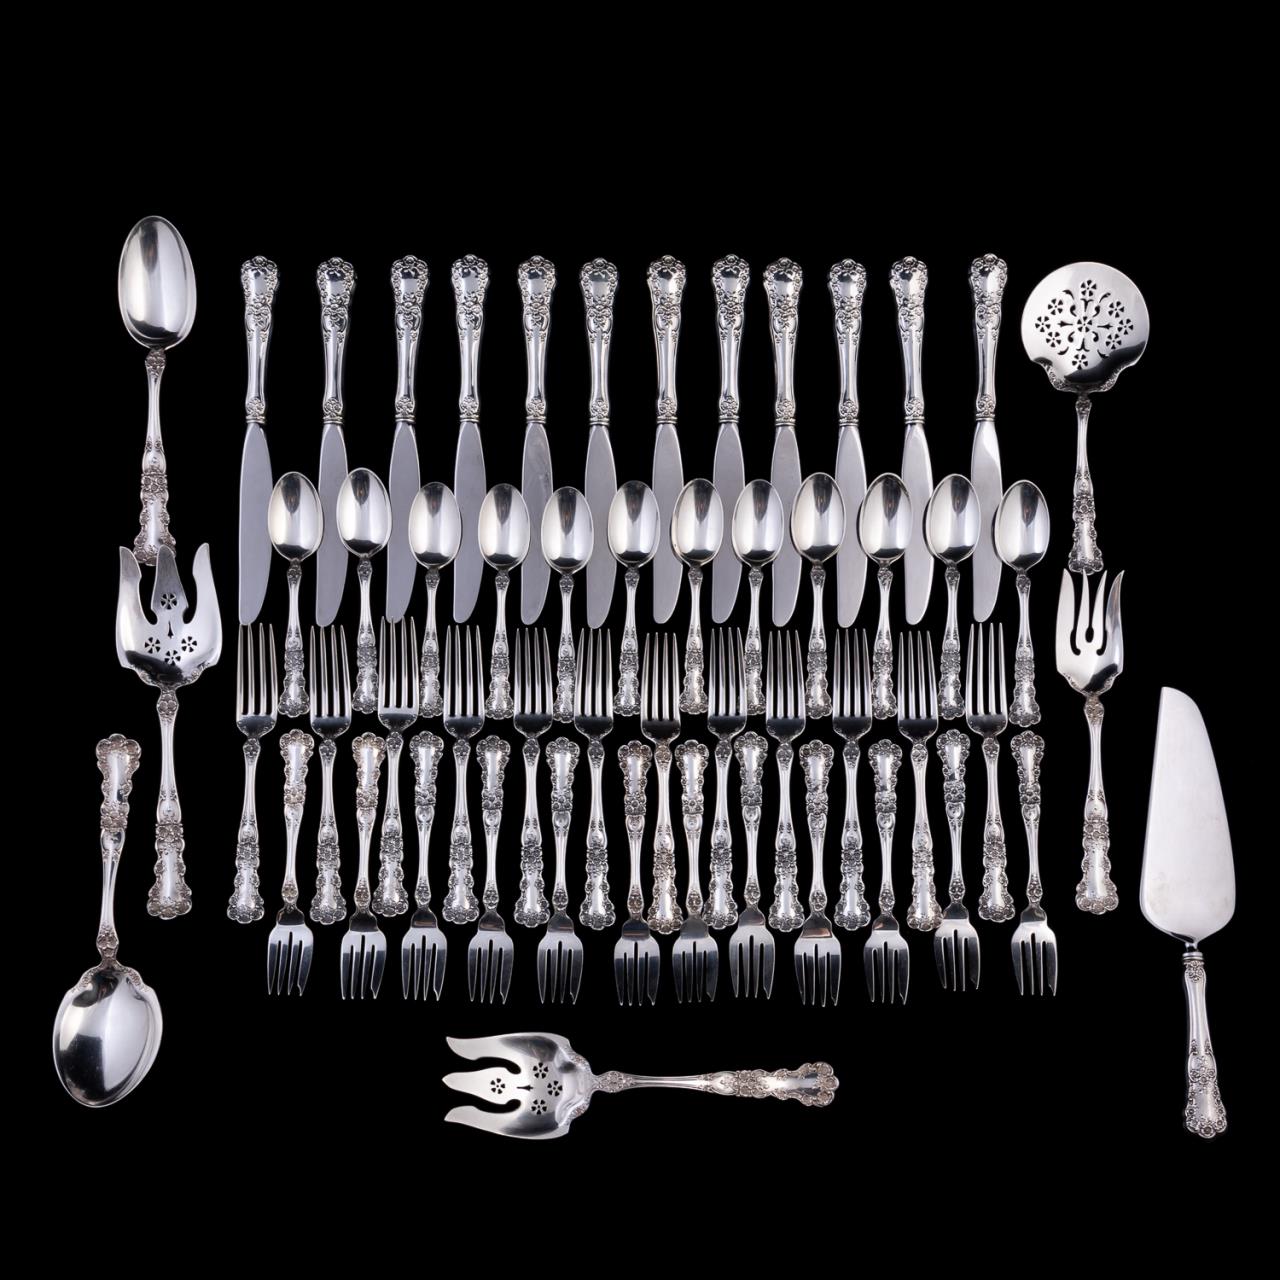 55 PC, GORHAM STERLING SILVER BUTTERCUP